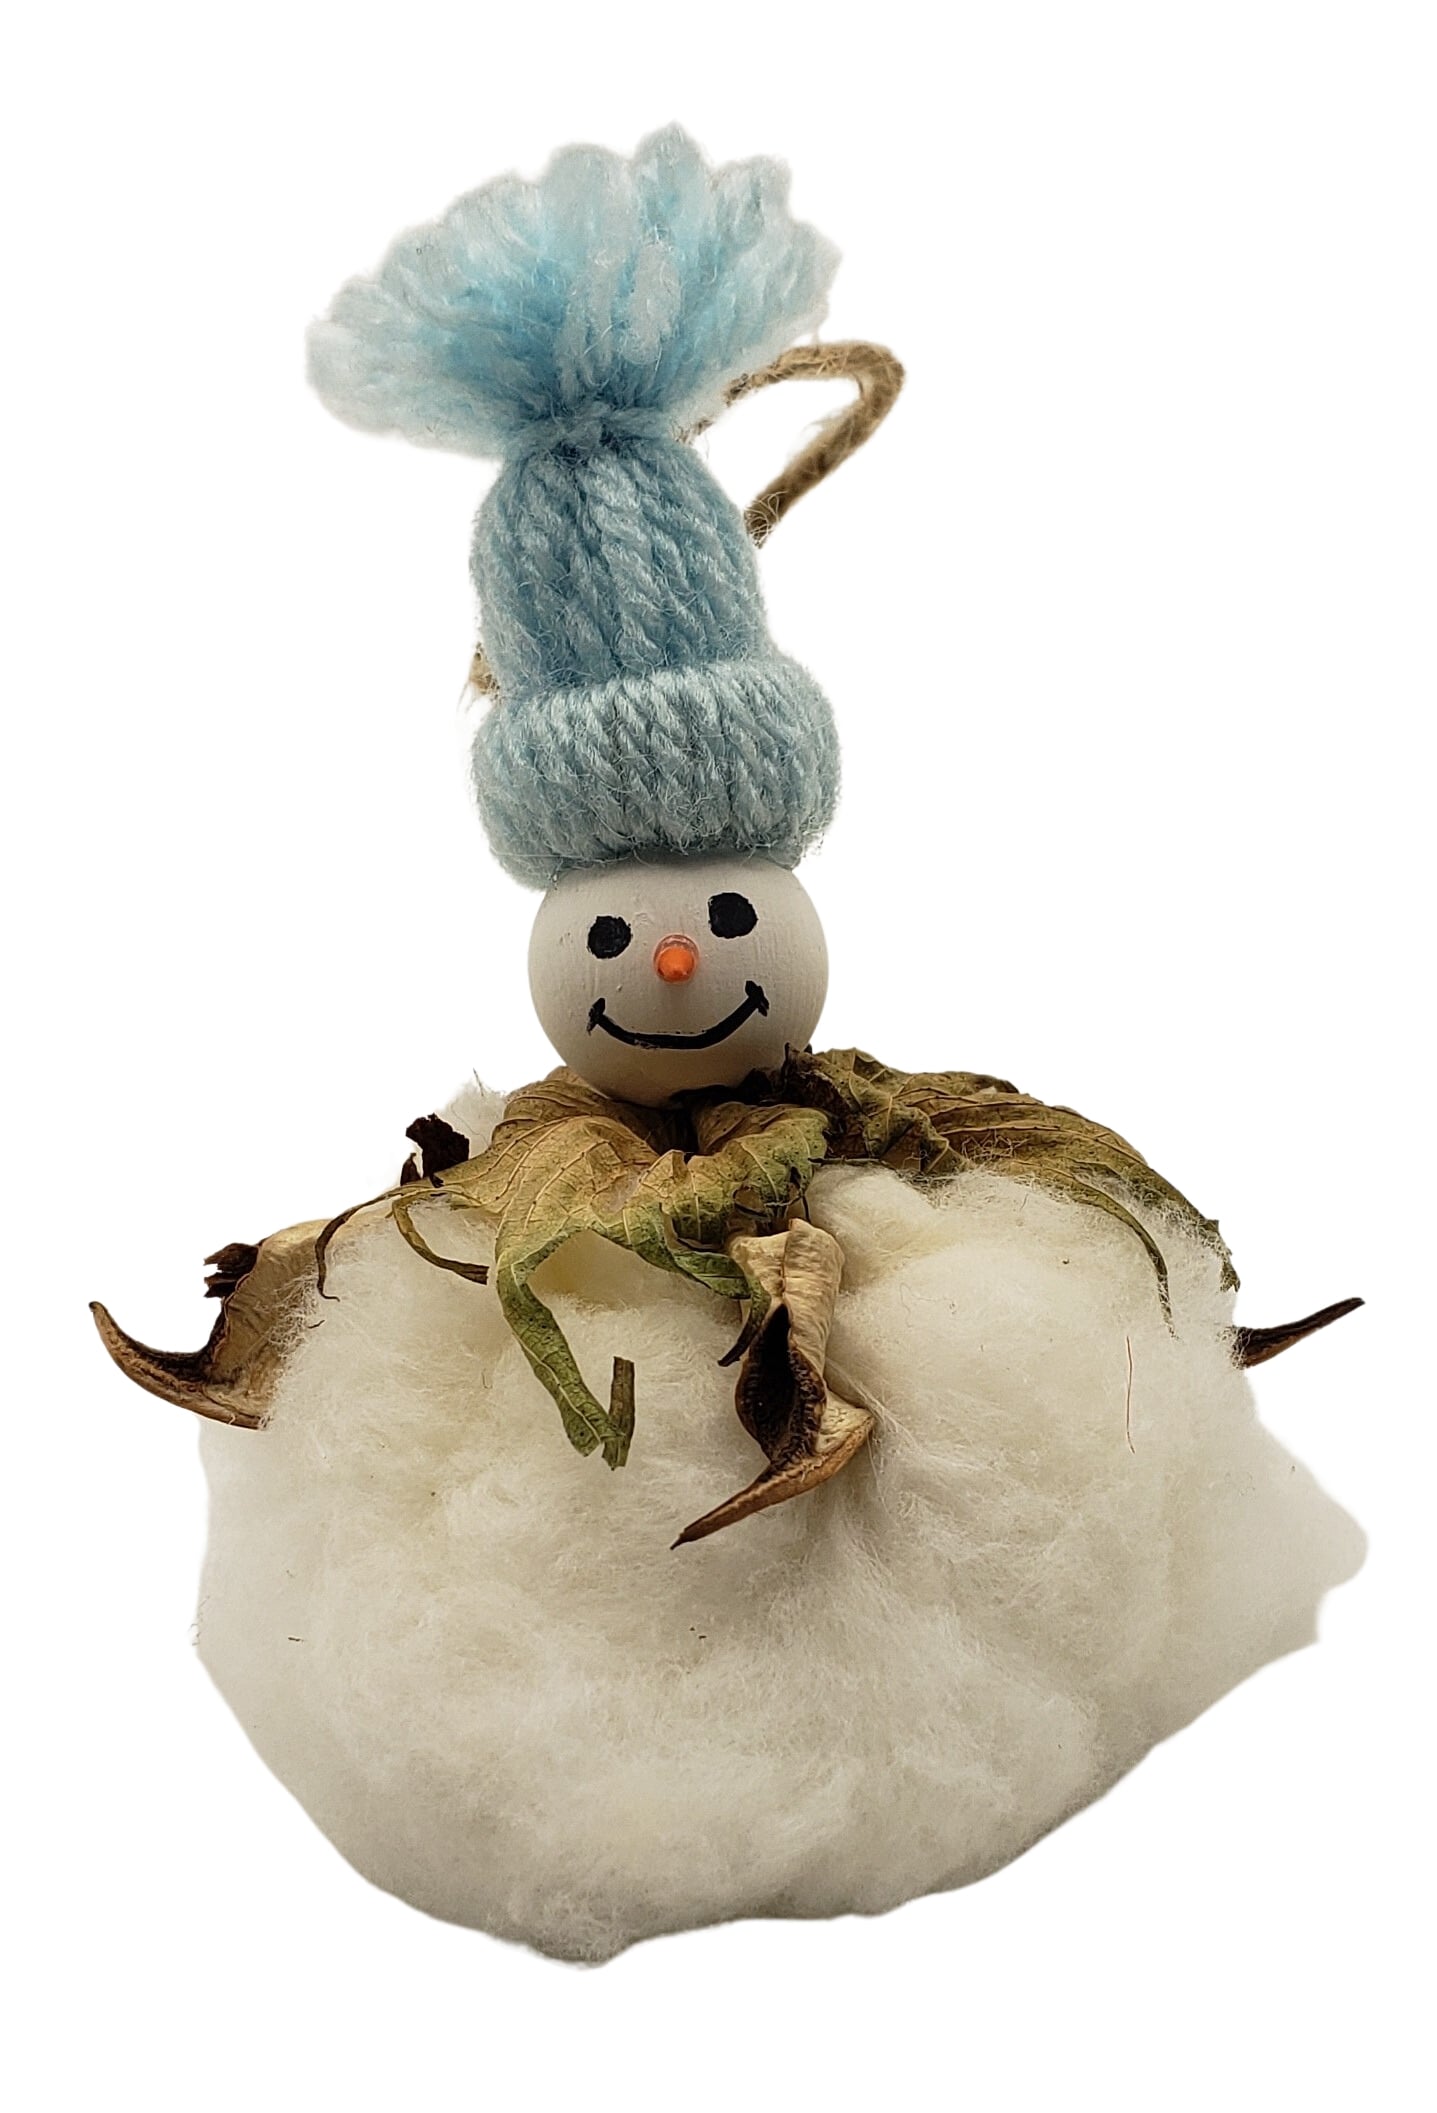 Natures Christmas - cotton boll snowman Christmas tree ornament with light blue toboggan hat